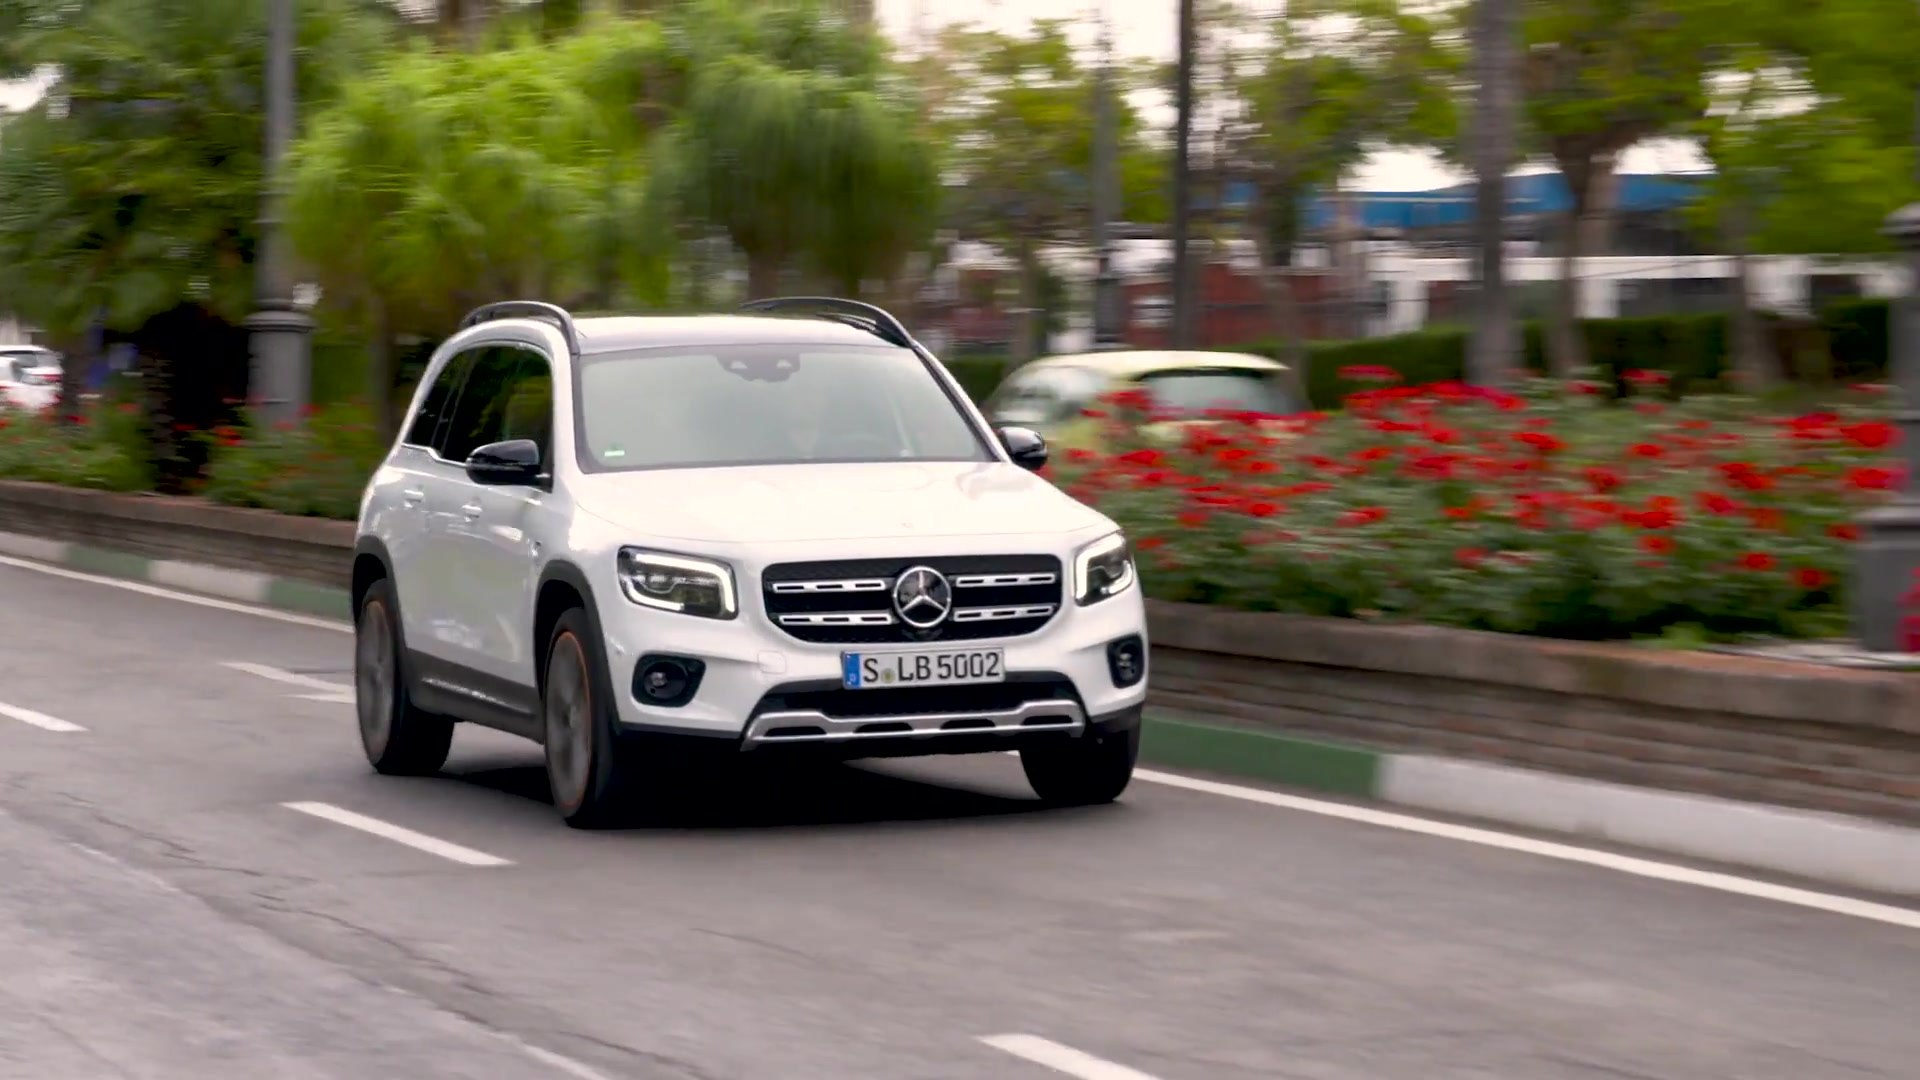 The New Mercedes Benz Glb 250 4matic In White Metallic Driving Video